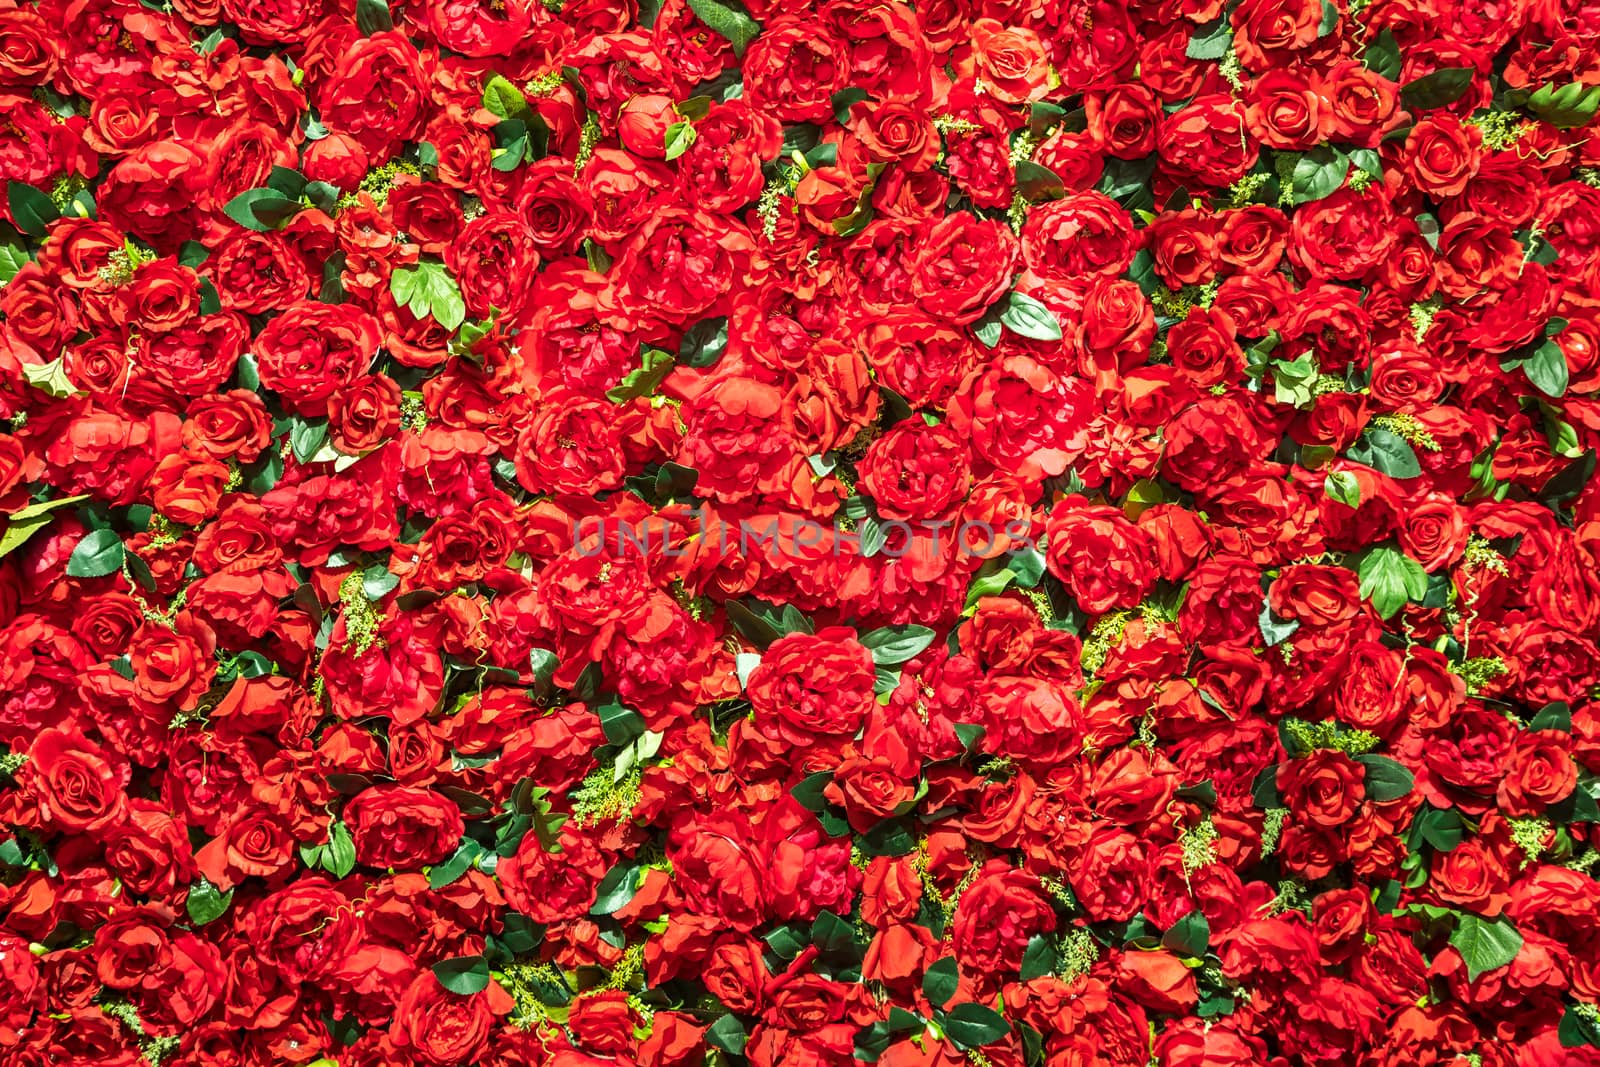 Flower background of red roses with green leaves